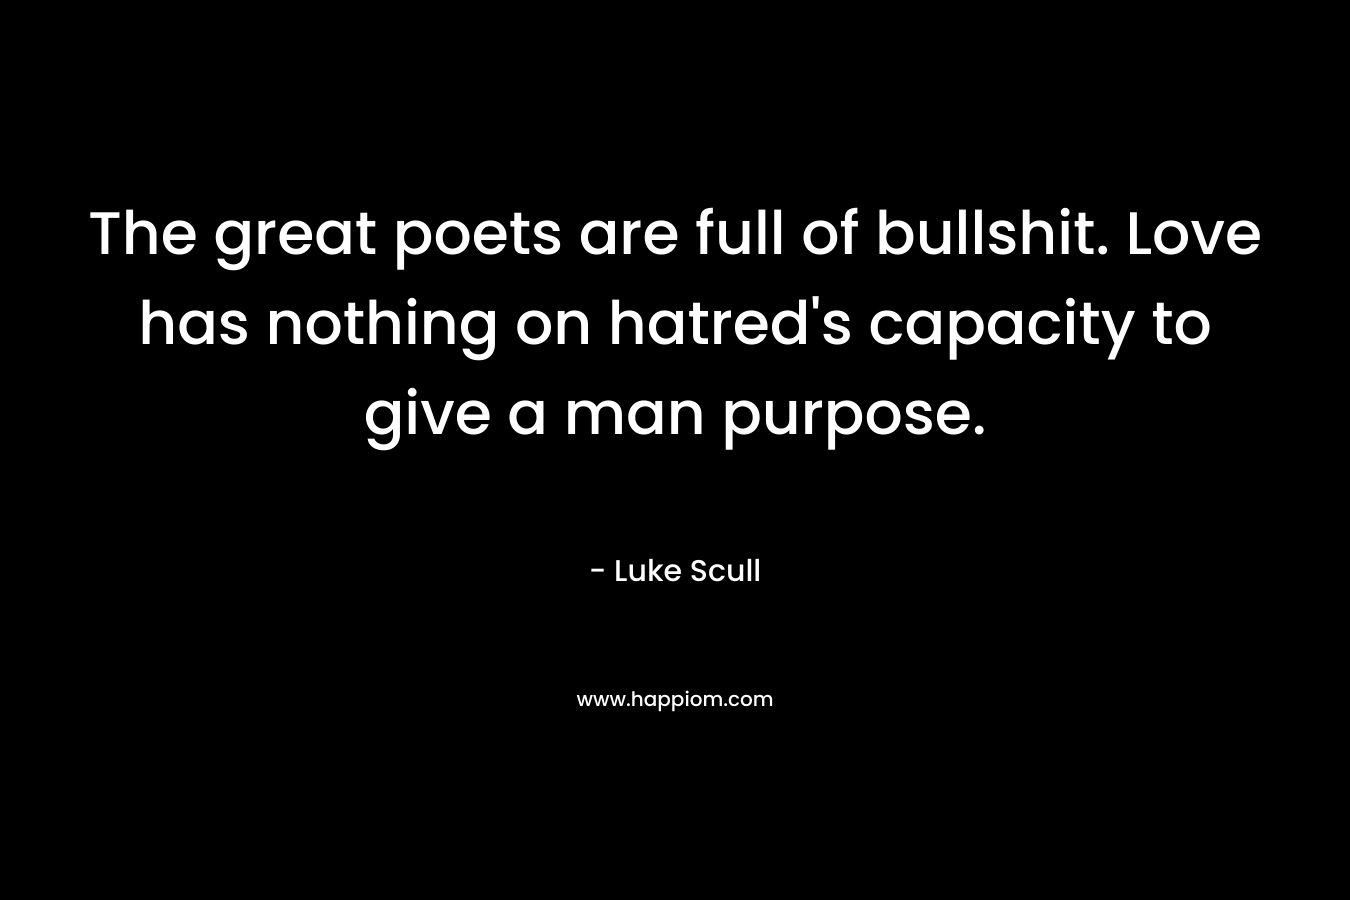 The great poets are full of bullshit. Love has nothing on hatred’s capacity to give a man purpose. – Luke Scull